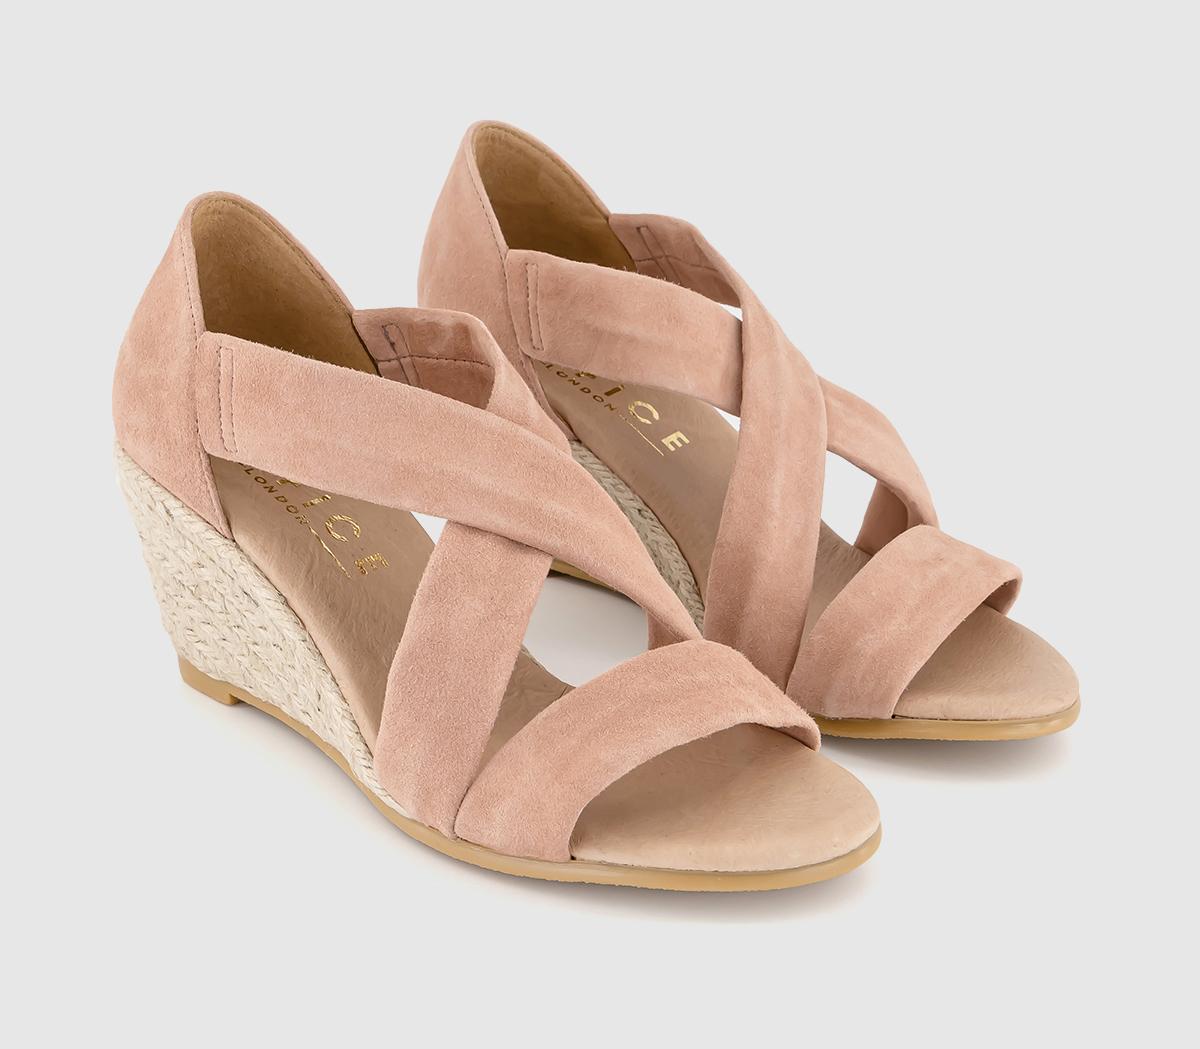 OFFICE Womens Women’s Pink Suede Nude Maiden Cross Strap Wedge Sandals, Size: 4